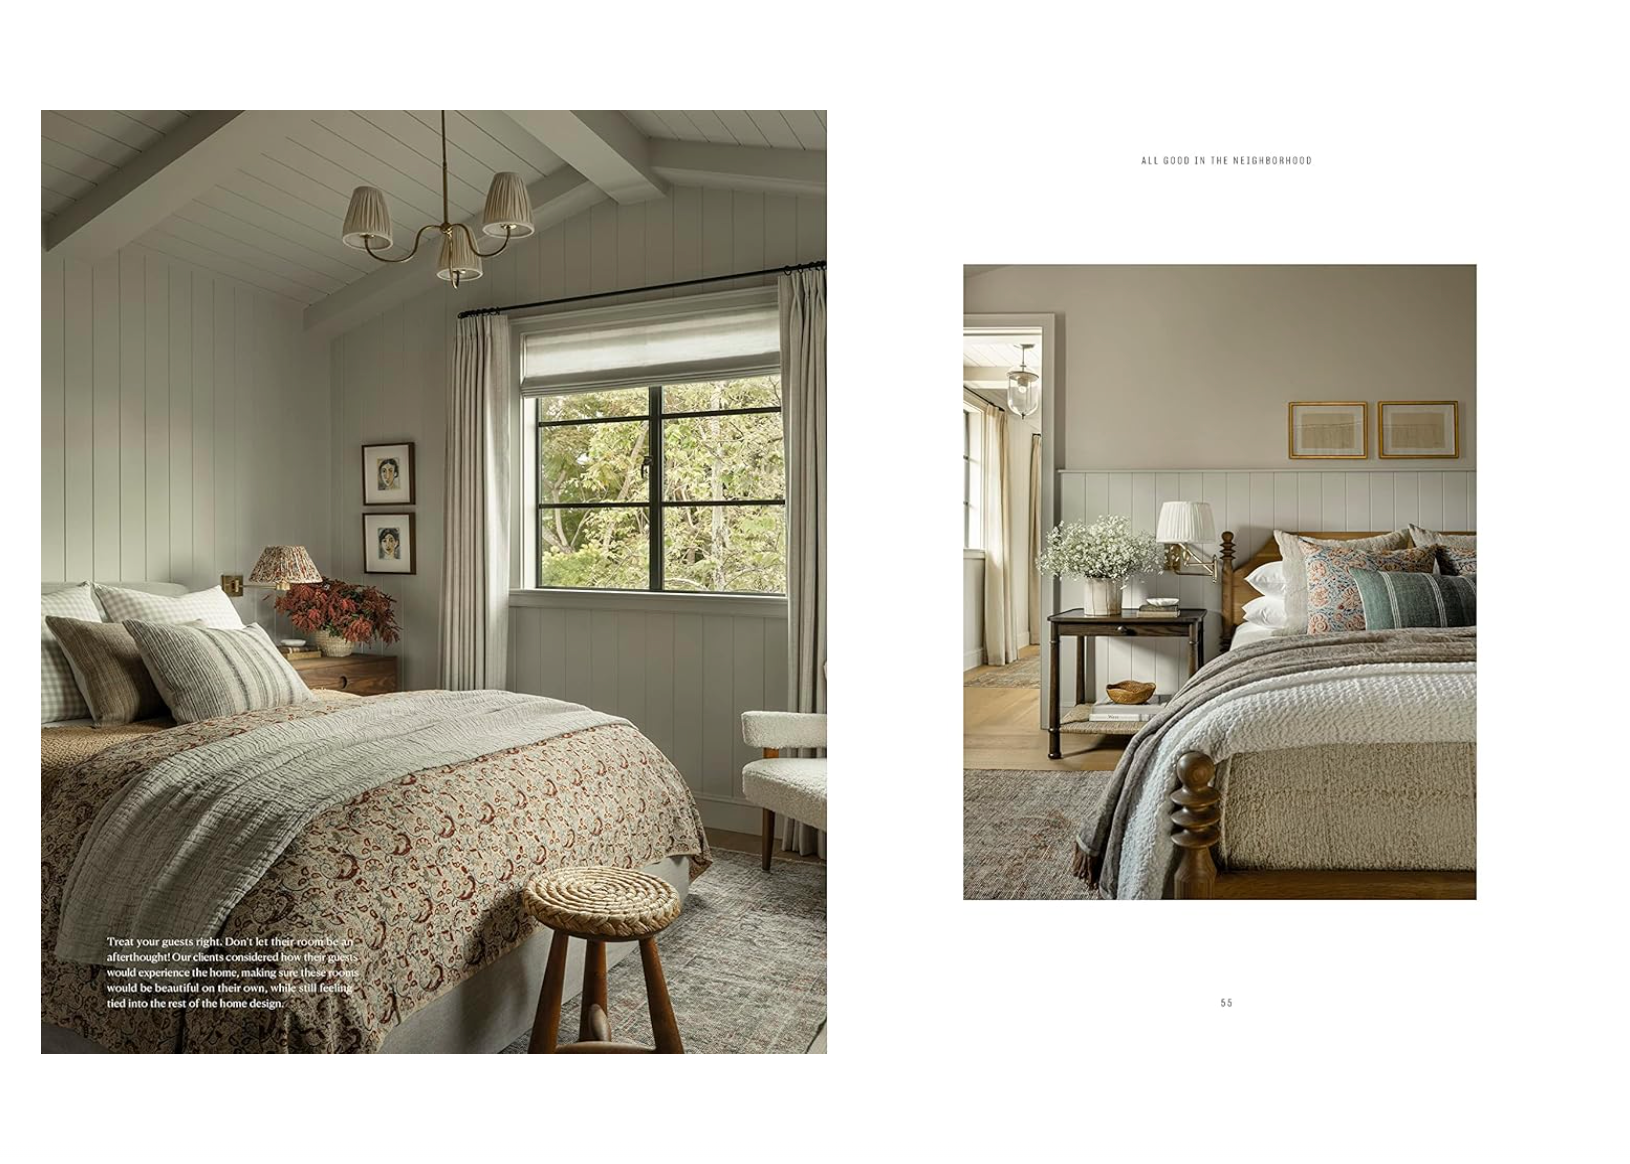 Two images of cozy, rustic bedrooms in a Scottsdale, Arizona bungalow with neutral color palettes. Left shows a bed with patterned bedding, a window, and a chair. Right features a bed with layered bedding and a small desk with a lamp from Call It Home: The Details That Matter by Random House.